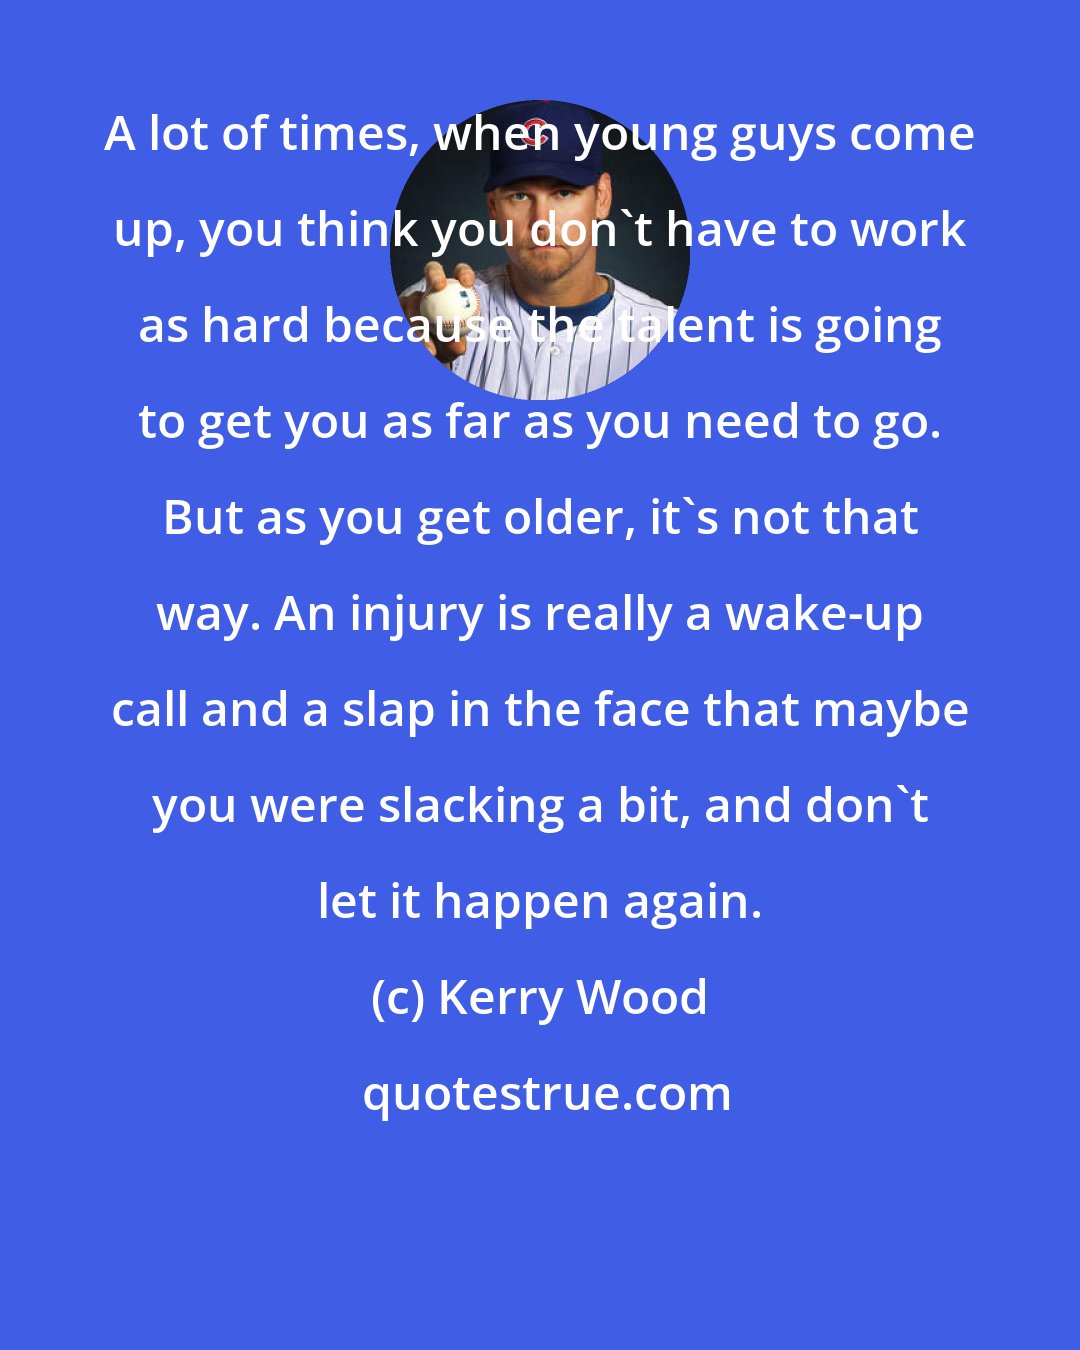 Kerry Wood: A lot of times, when young guys come up, you think you don't have to work as hard because the talent is going to get you as far as you need to go. But as you get older, it's not that way. An injury is really a wake-up call and a slap in the face that maybe you were slacking a bit, and don't let it happen again.